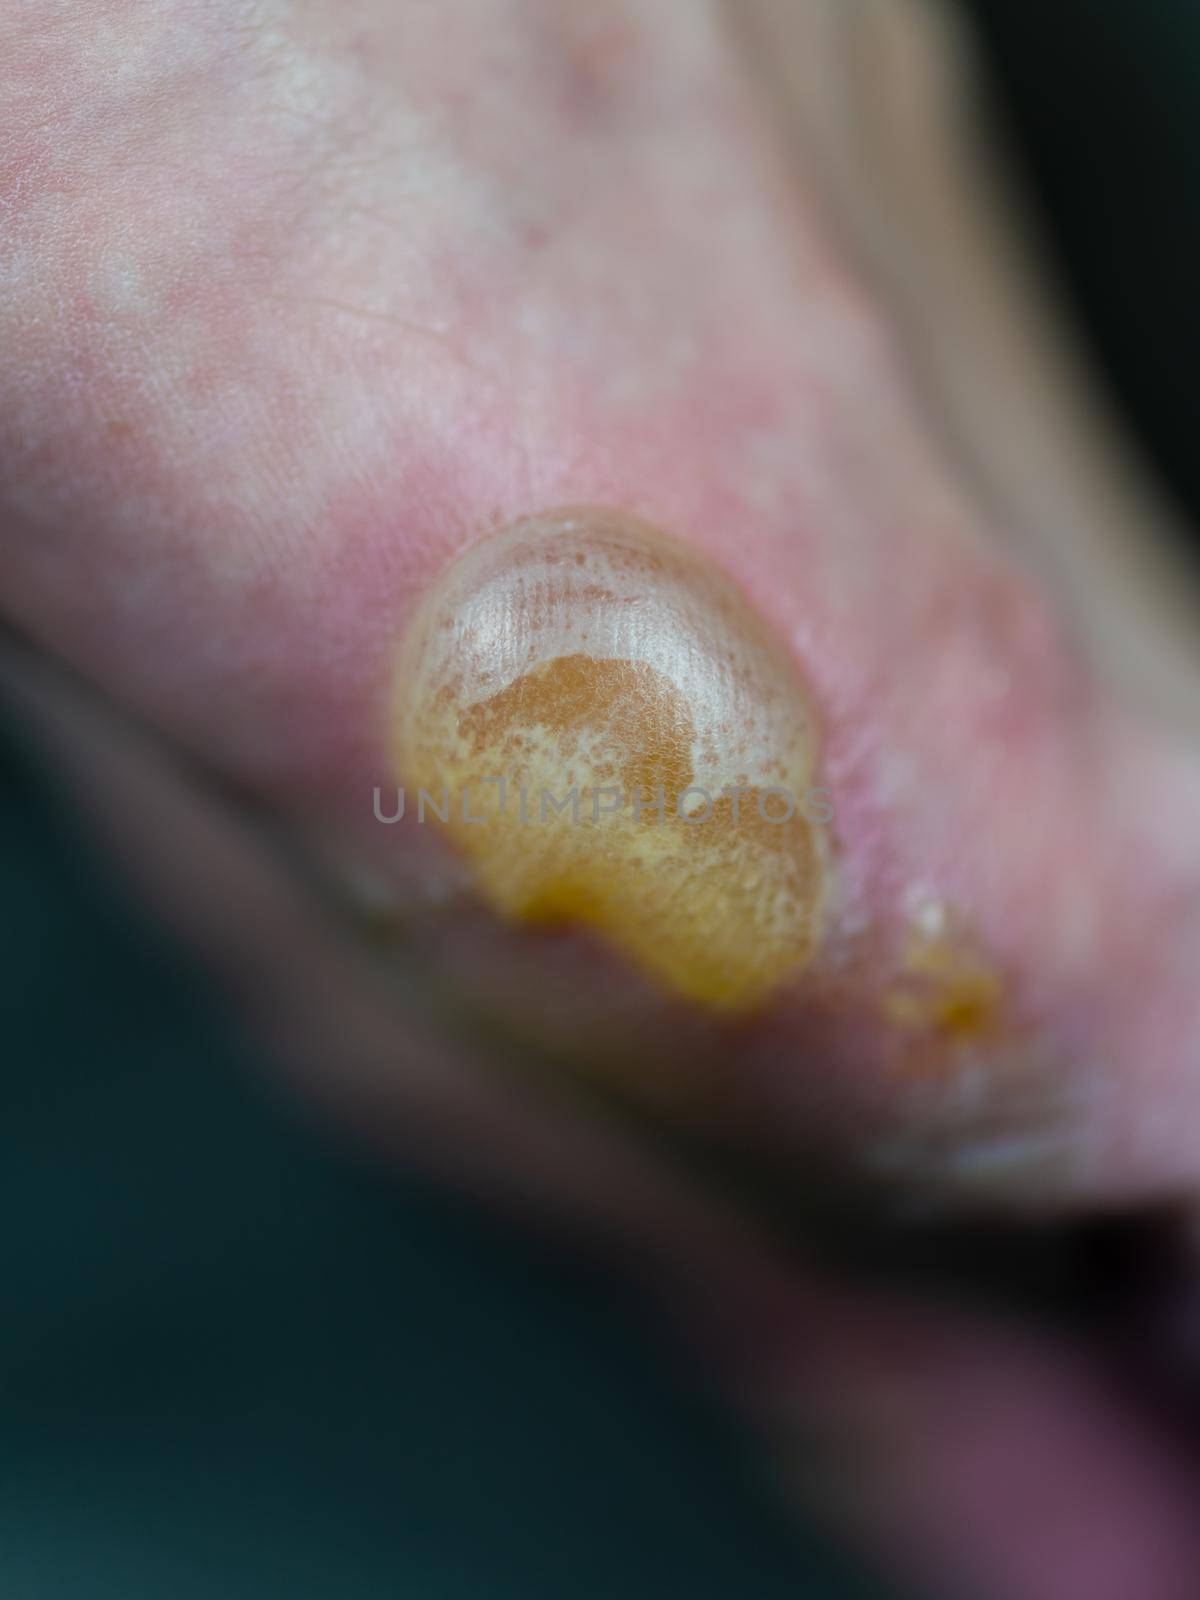 Big blister on foot from Pompholyx eczema by imagesbykenny